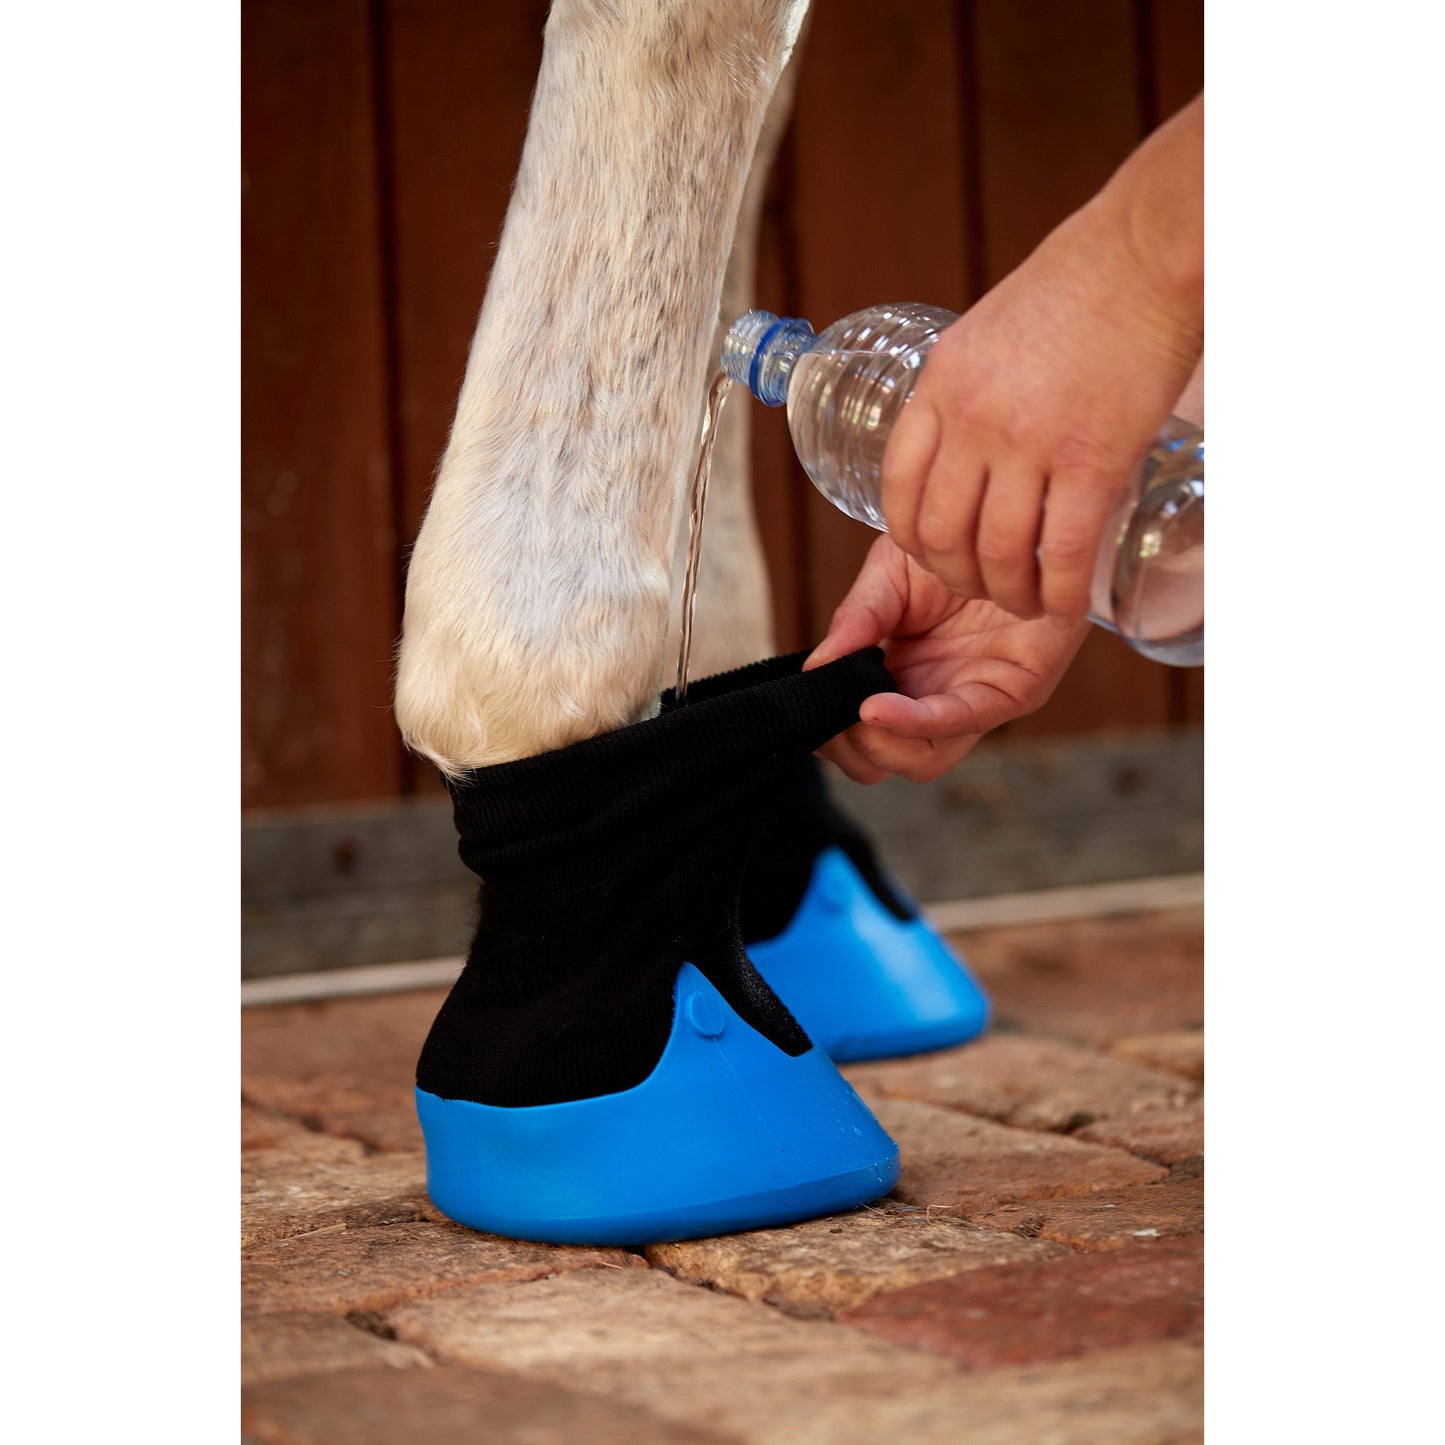 A horse's hoof being placed into a blue boot, with a person's hand pouring water from a bottle to clean it.